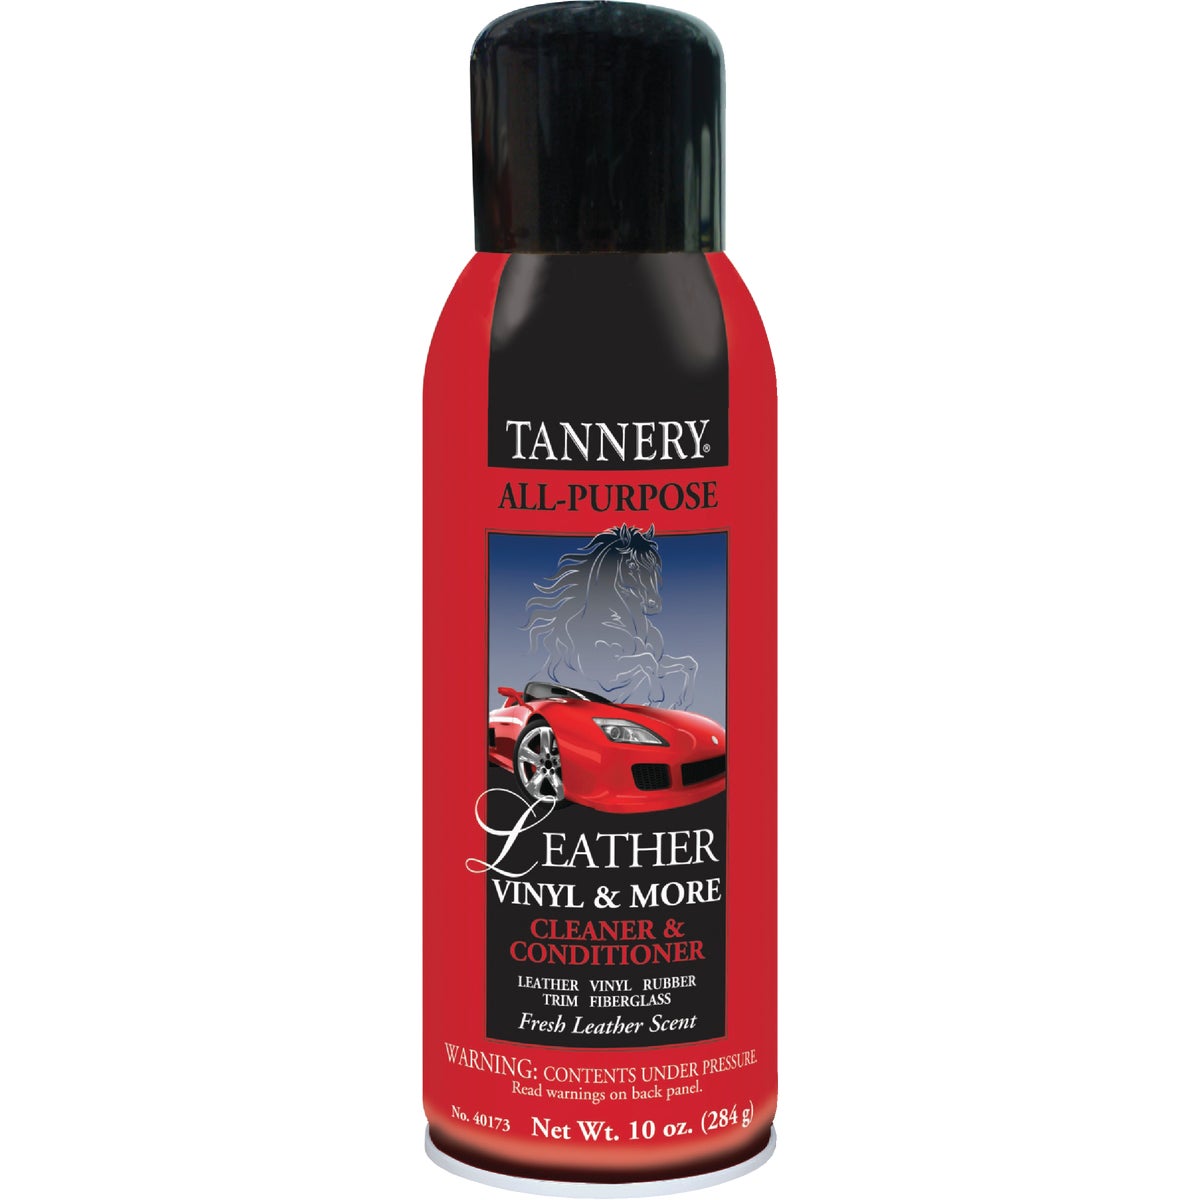 Item 632097, Aerosol formula cleans, conditions, protects, and preserves leather, vinyl 